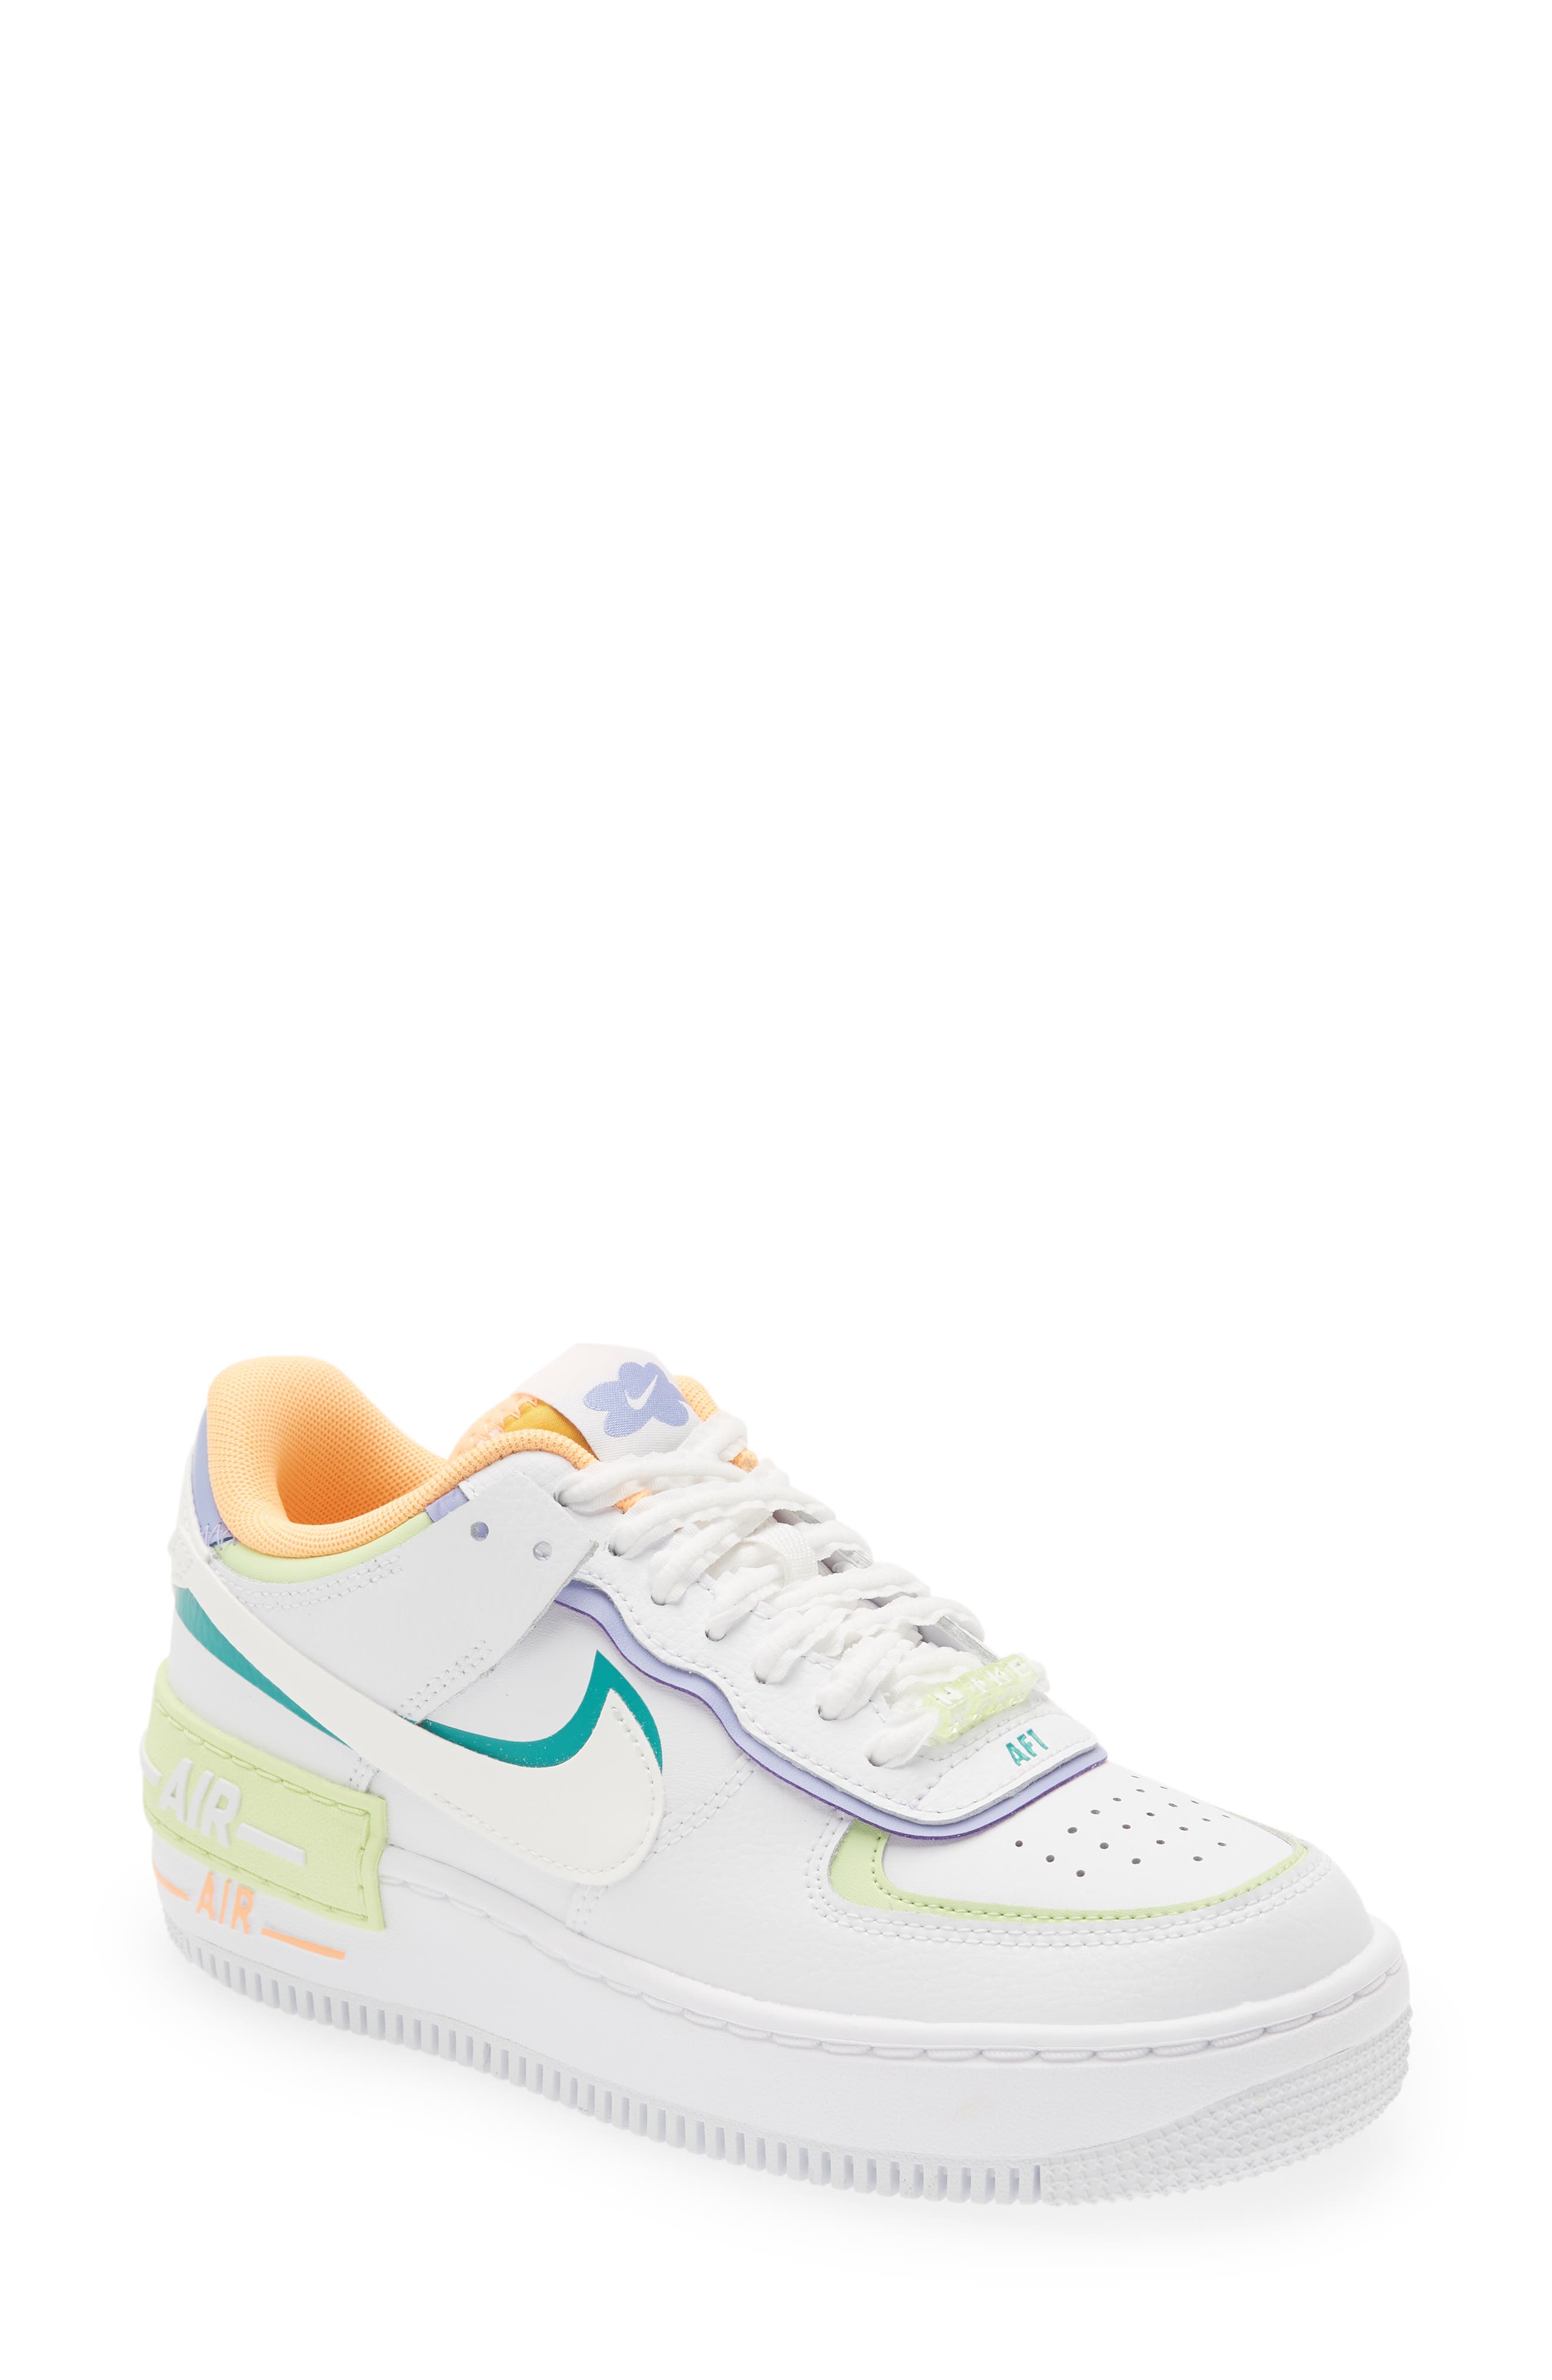 womens air force 1 nordstrom